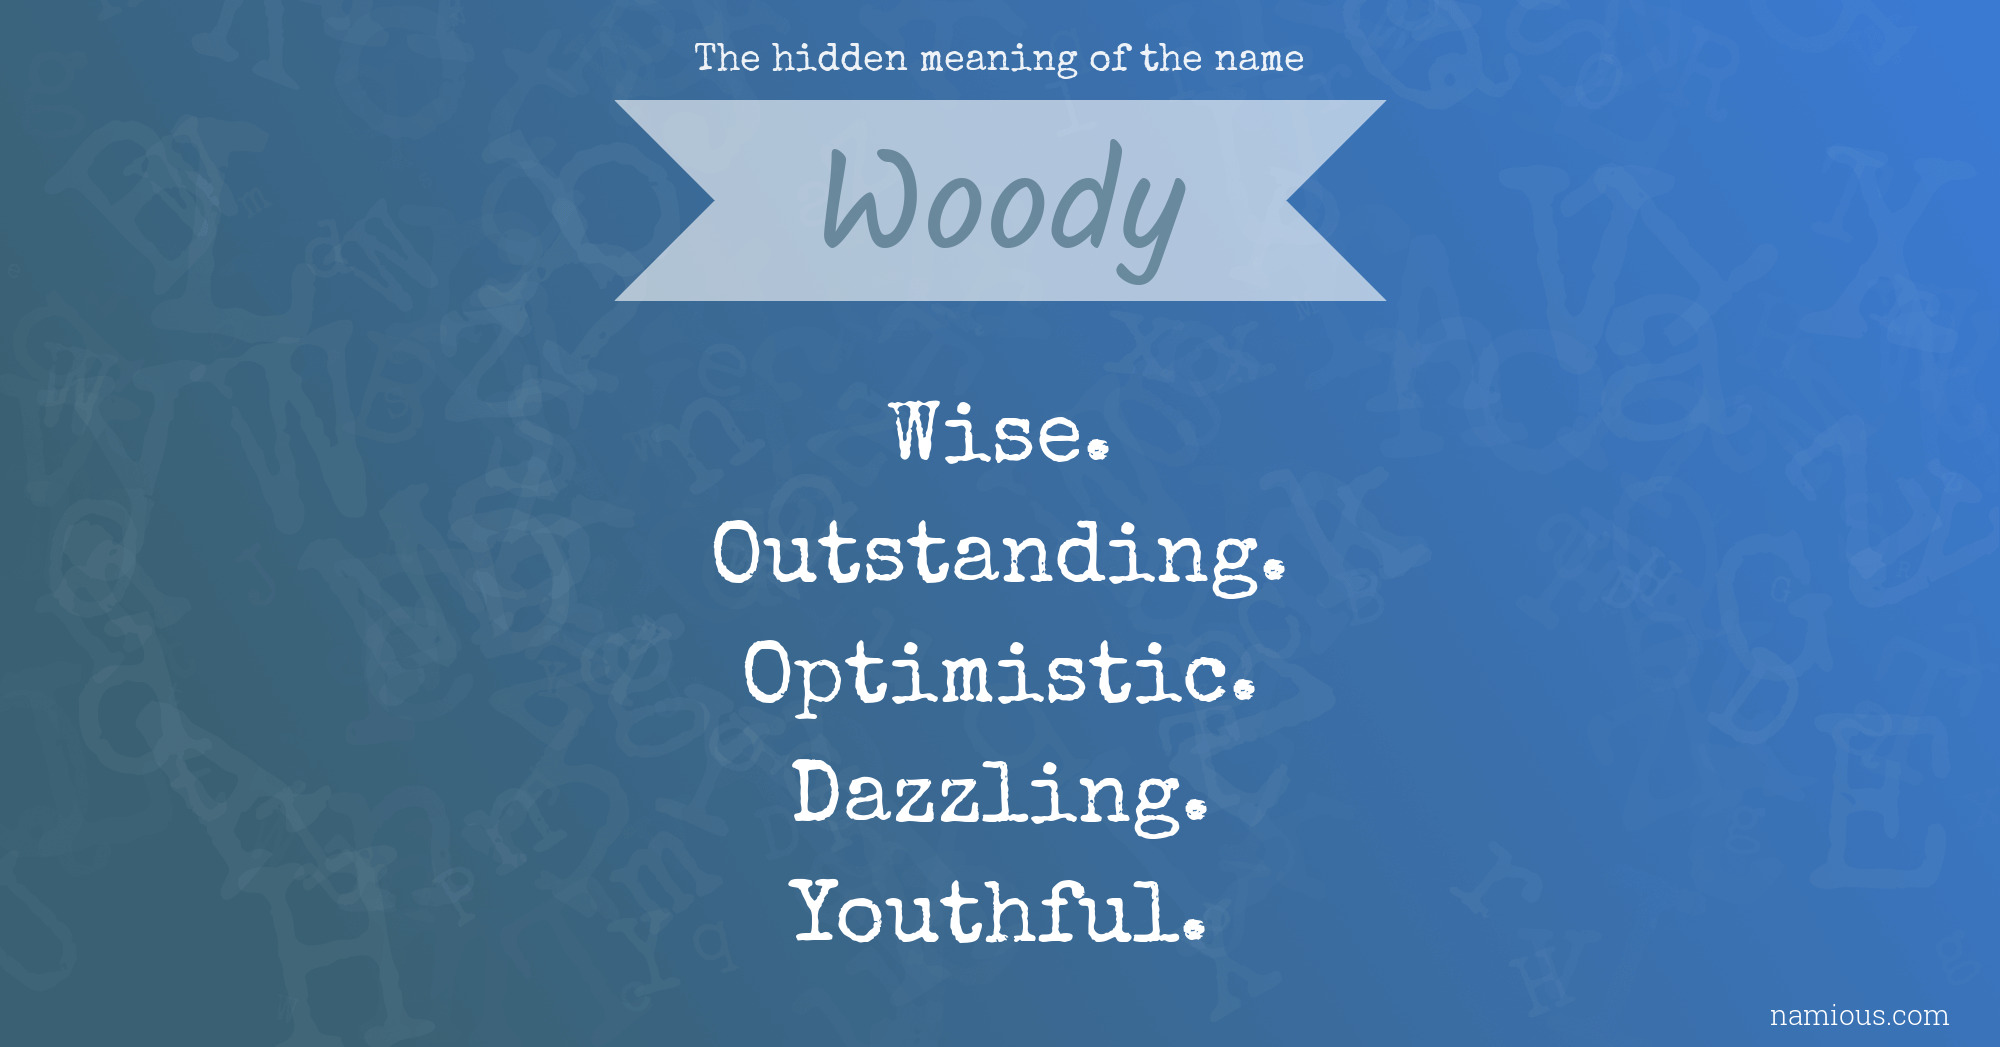 The hidden meaning of the name Woody